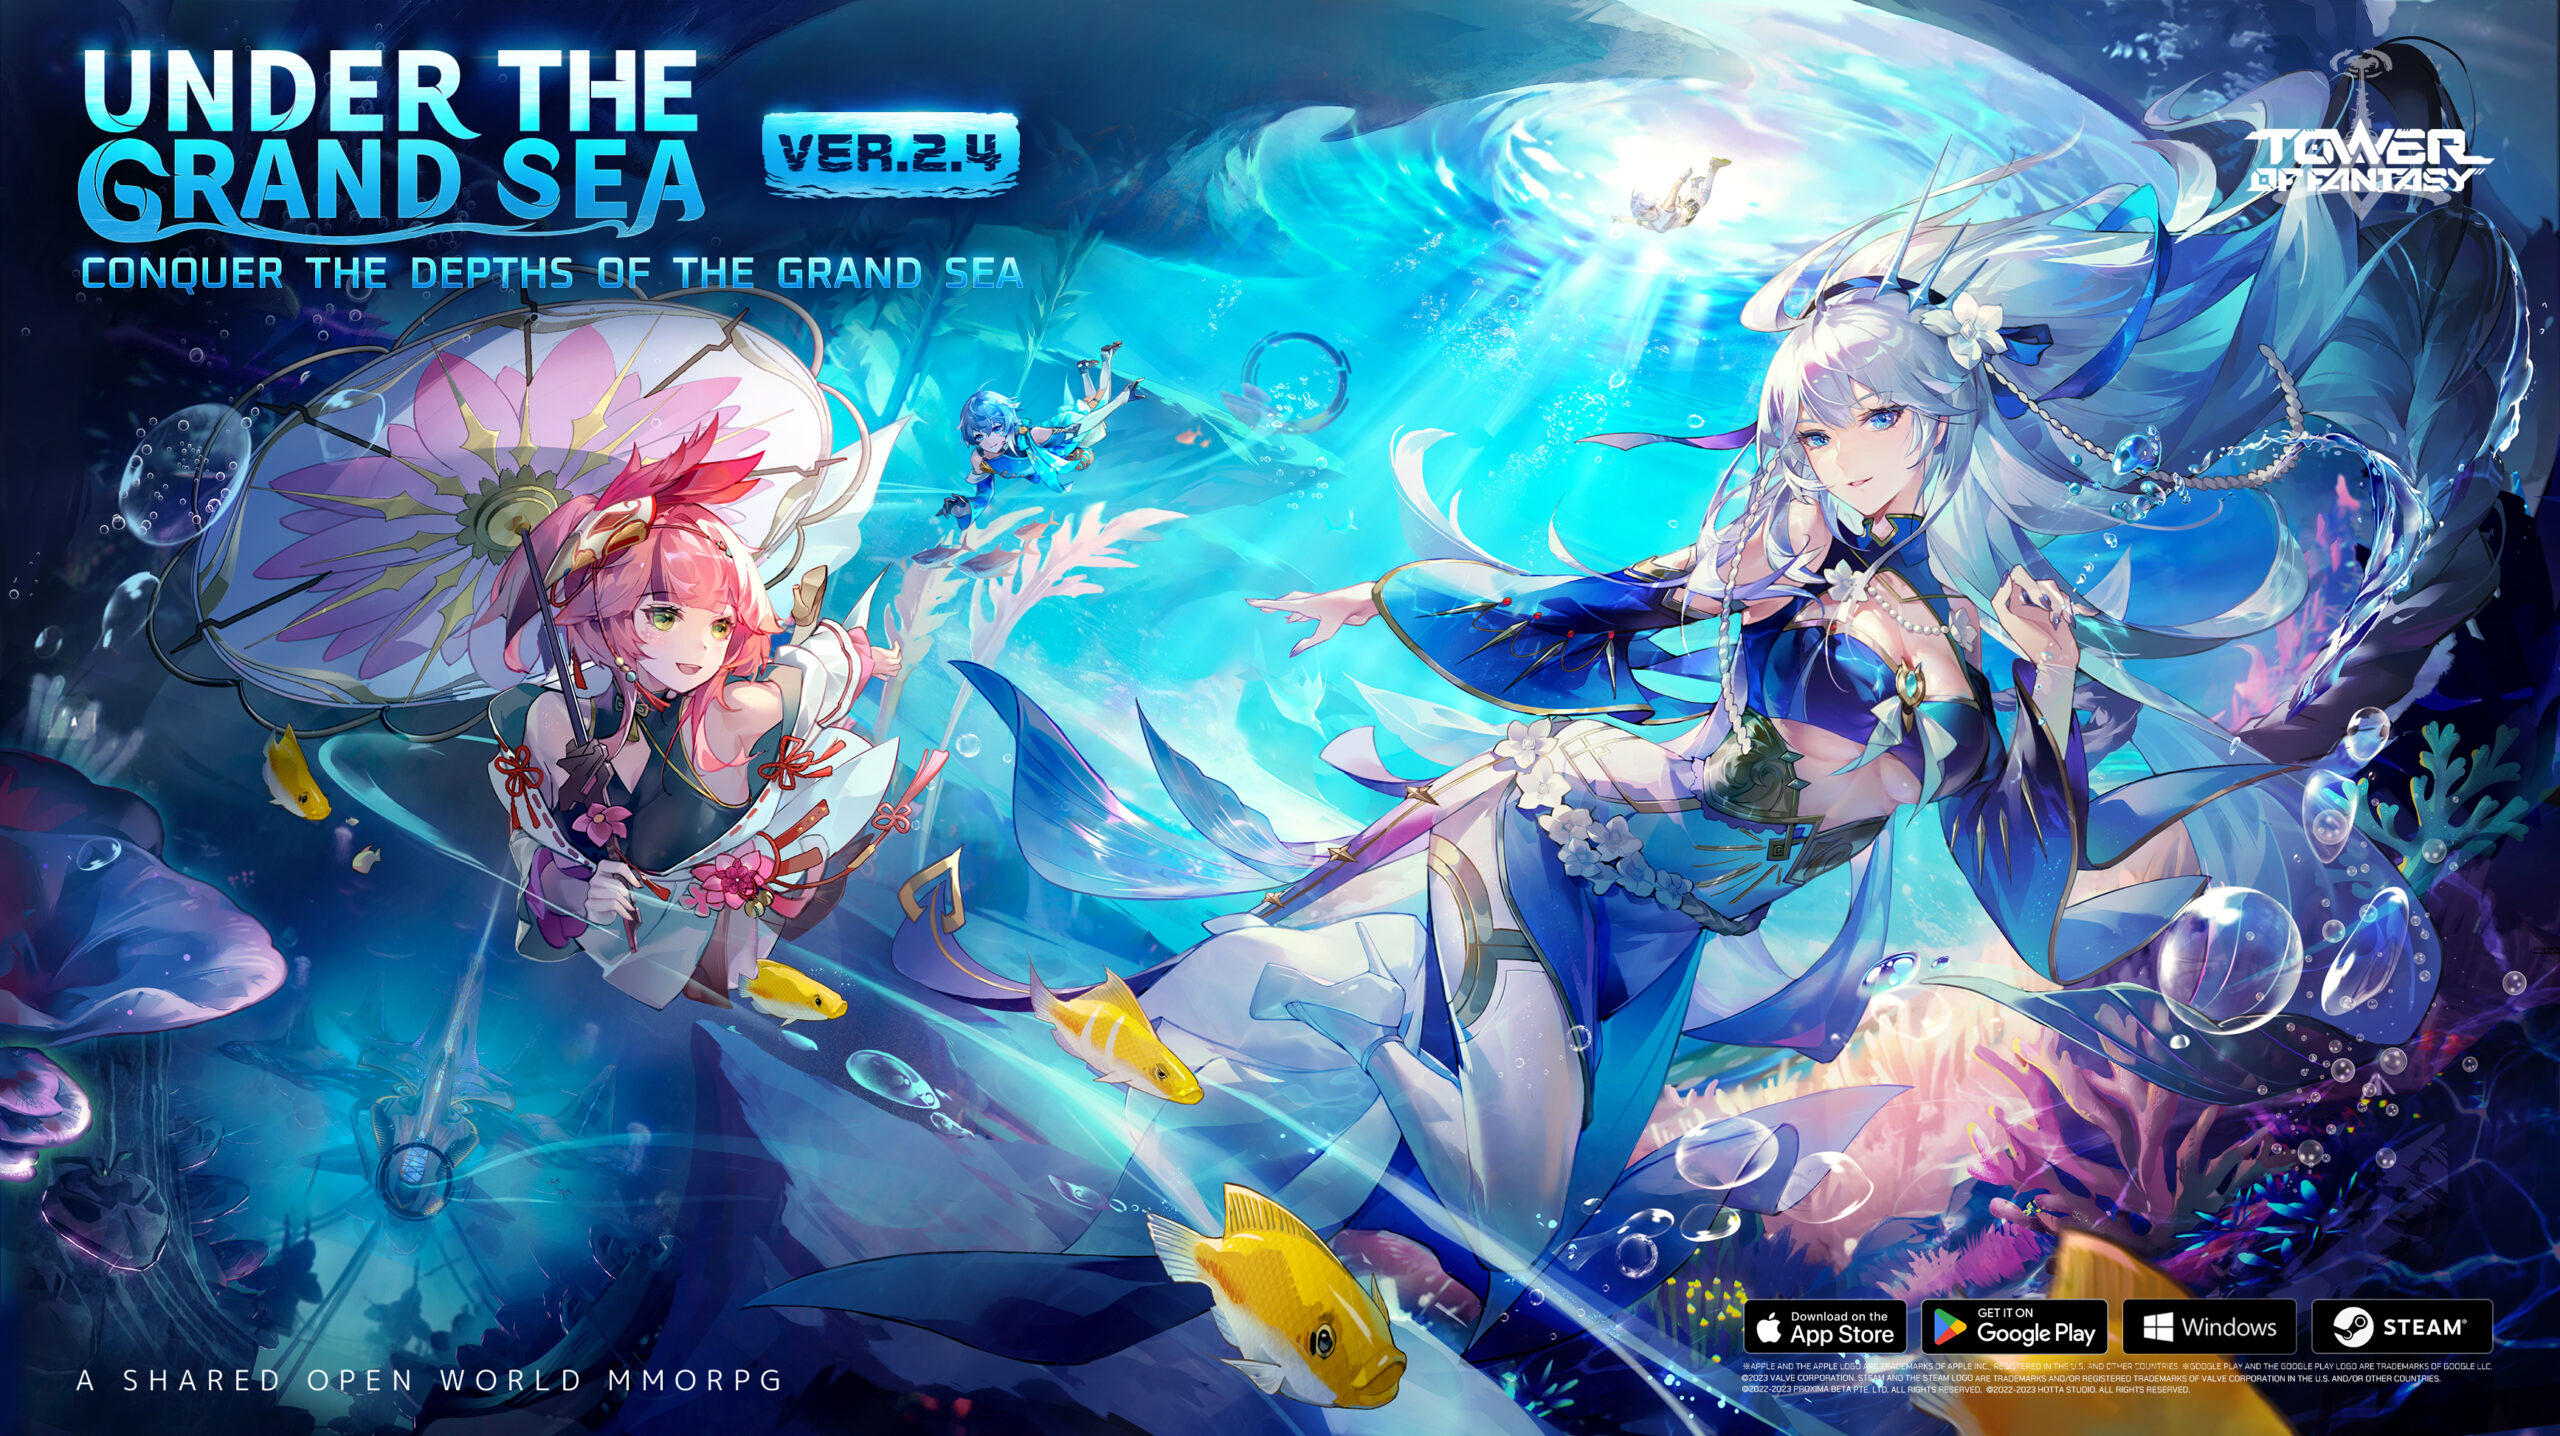 Tower of Fantasy Version 2.4: Under the Grand Sea Launches Soon 9